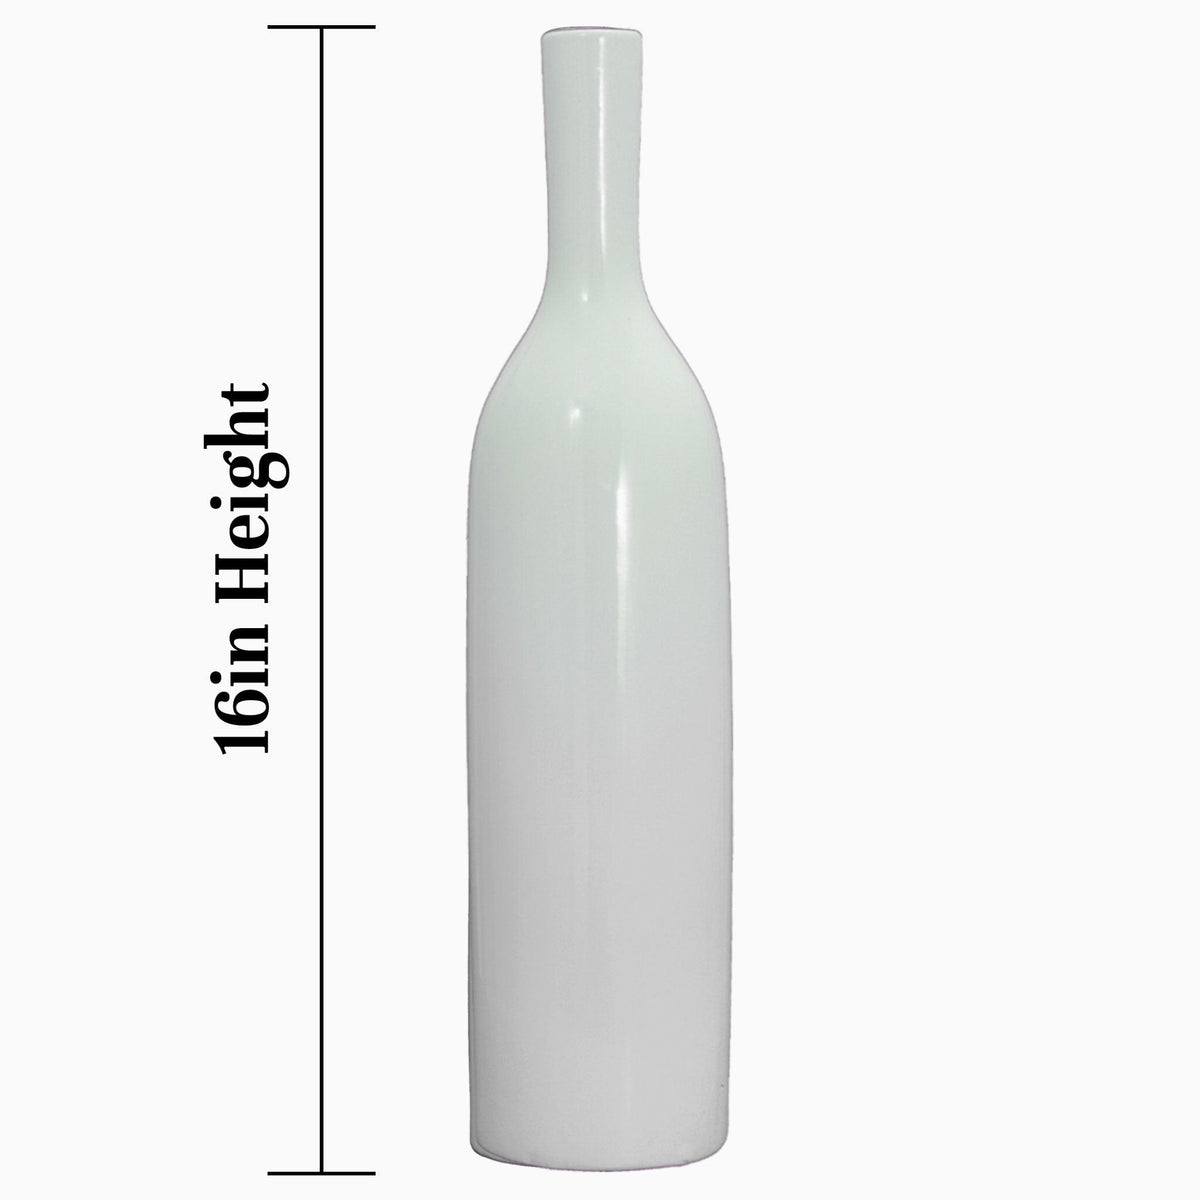 Lee Display's brand new Long Neck Ceramic Vase sold in high gloss white finish on sale at leedisplay.com